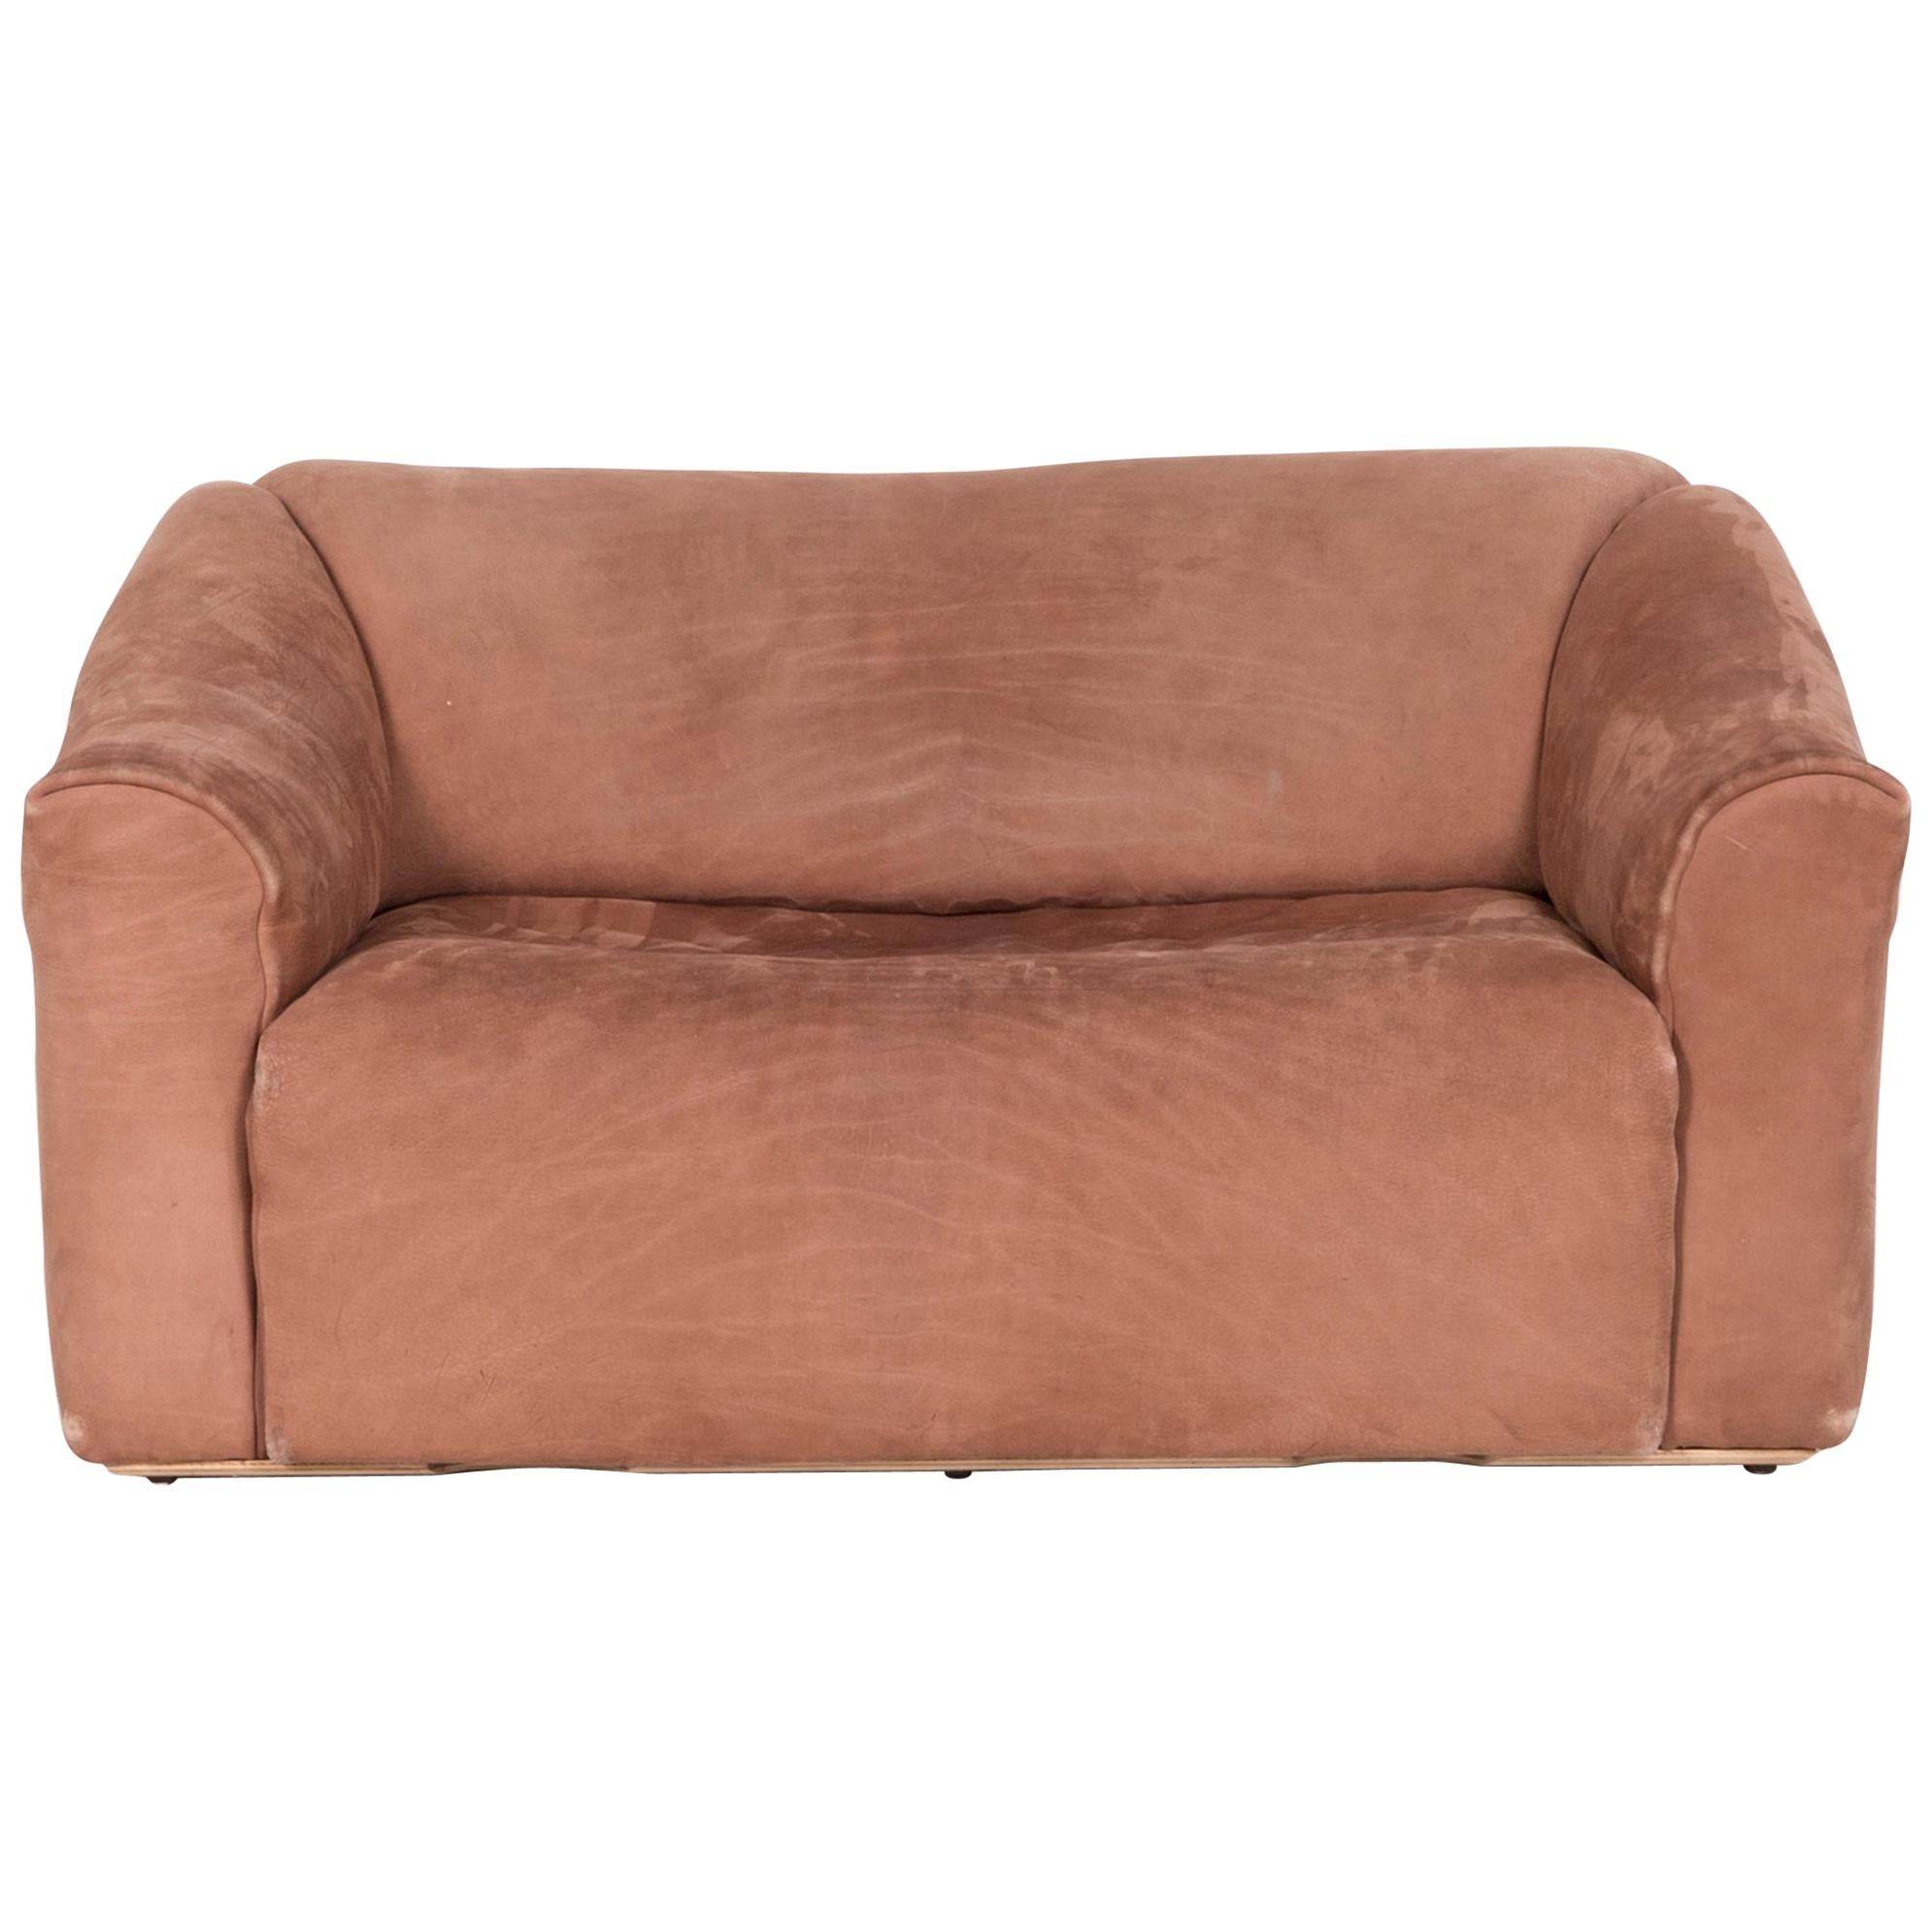 de Sede DS 47 Designer Leather Sofa Brown Genuine Leather Two-Seat Couch